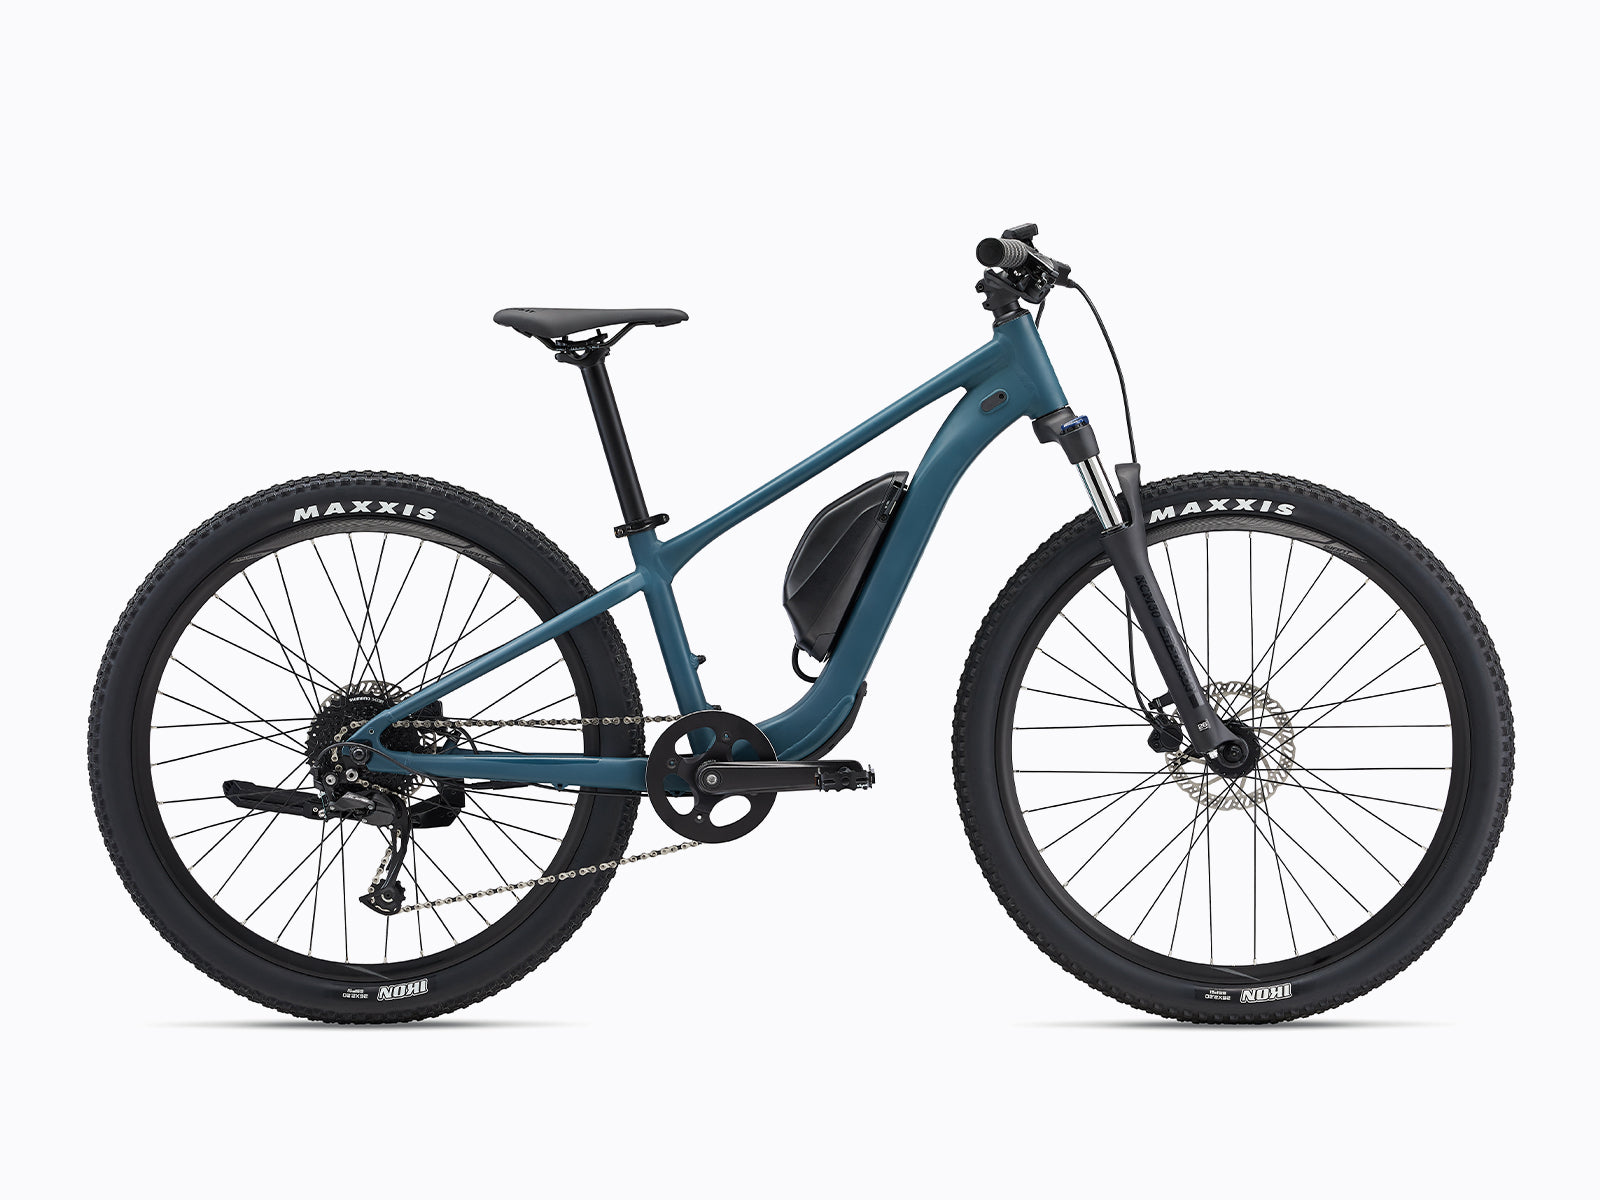 image features a Giant talon E+ junior, an electric mountain bike sold by Giant Melbourne, Melbourne based bike shop with experienced mechanics.